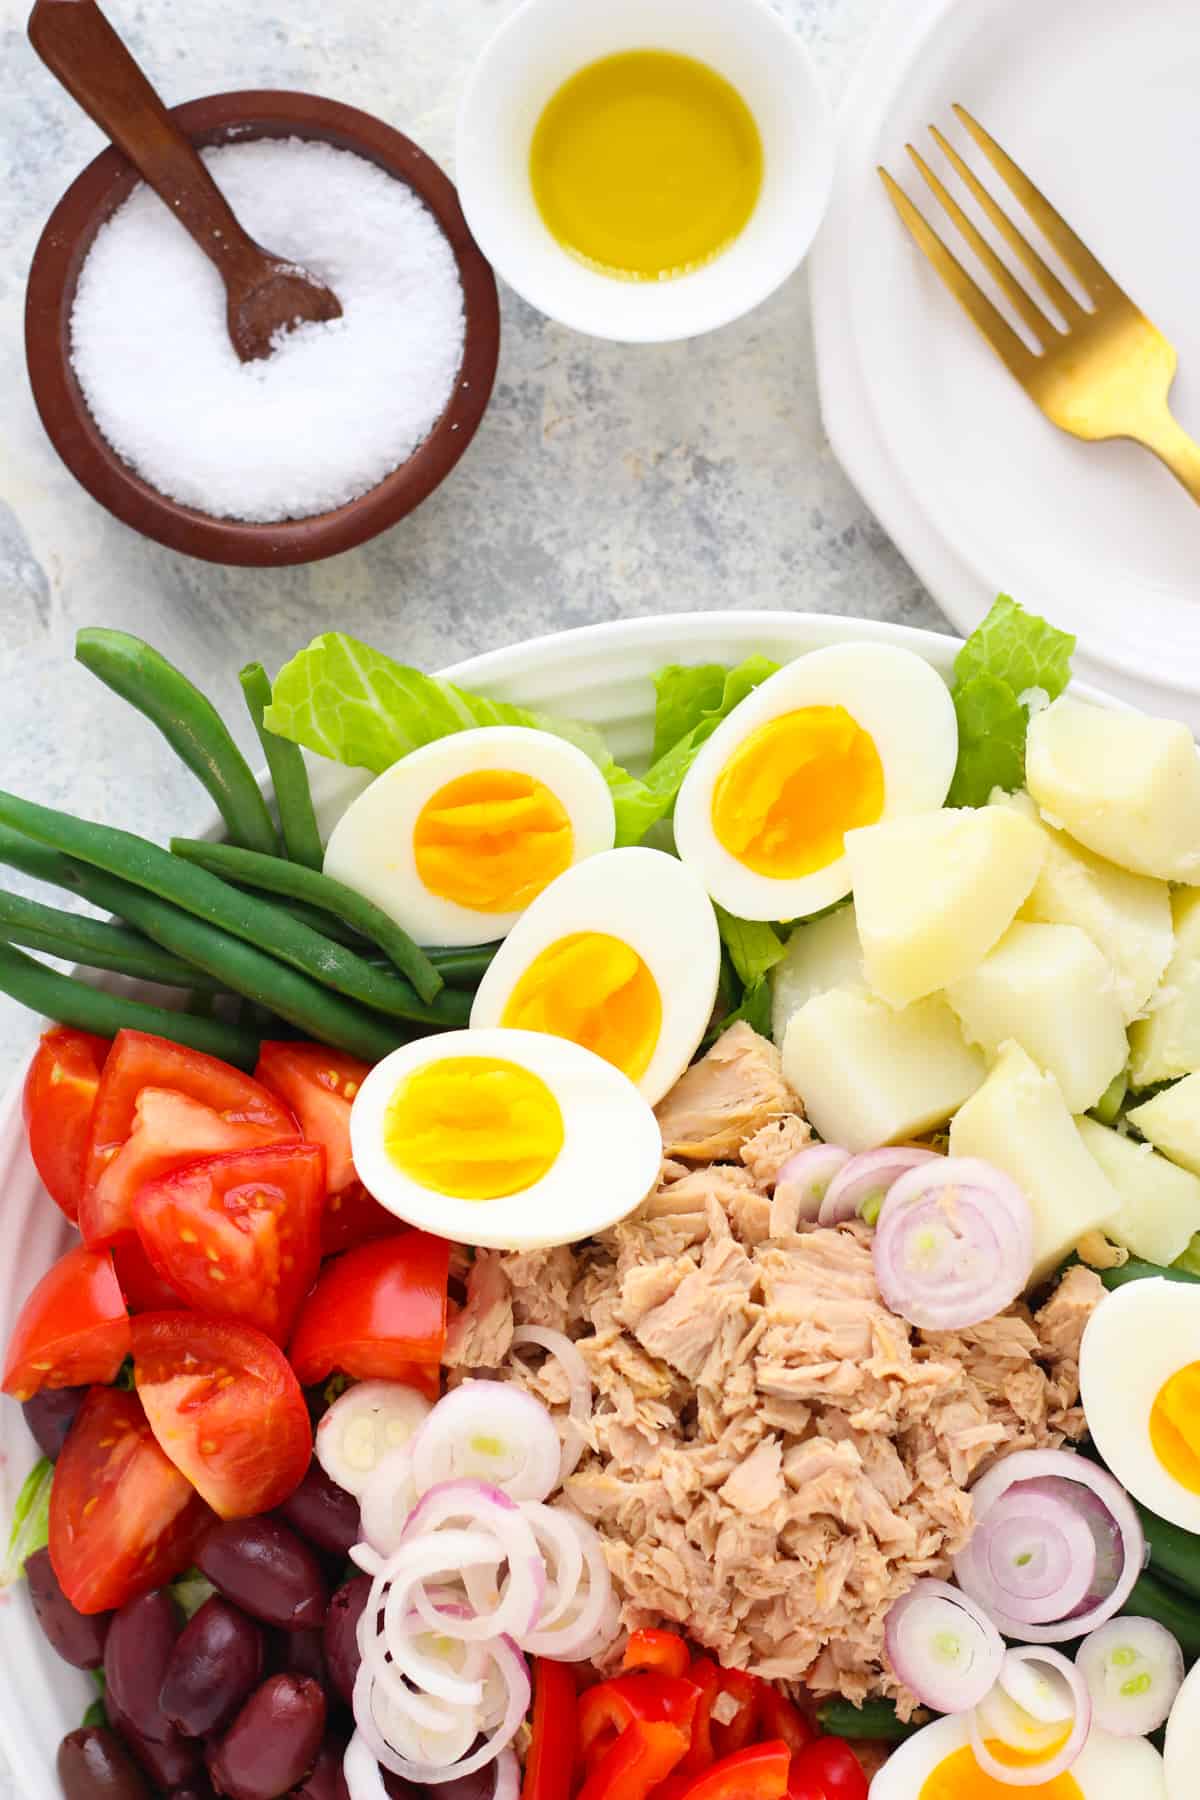 Tuna nicoise salad can be served as lunch or dinner. 